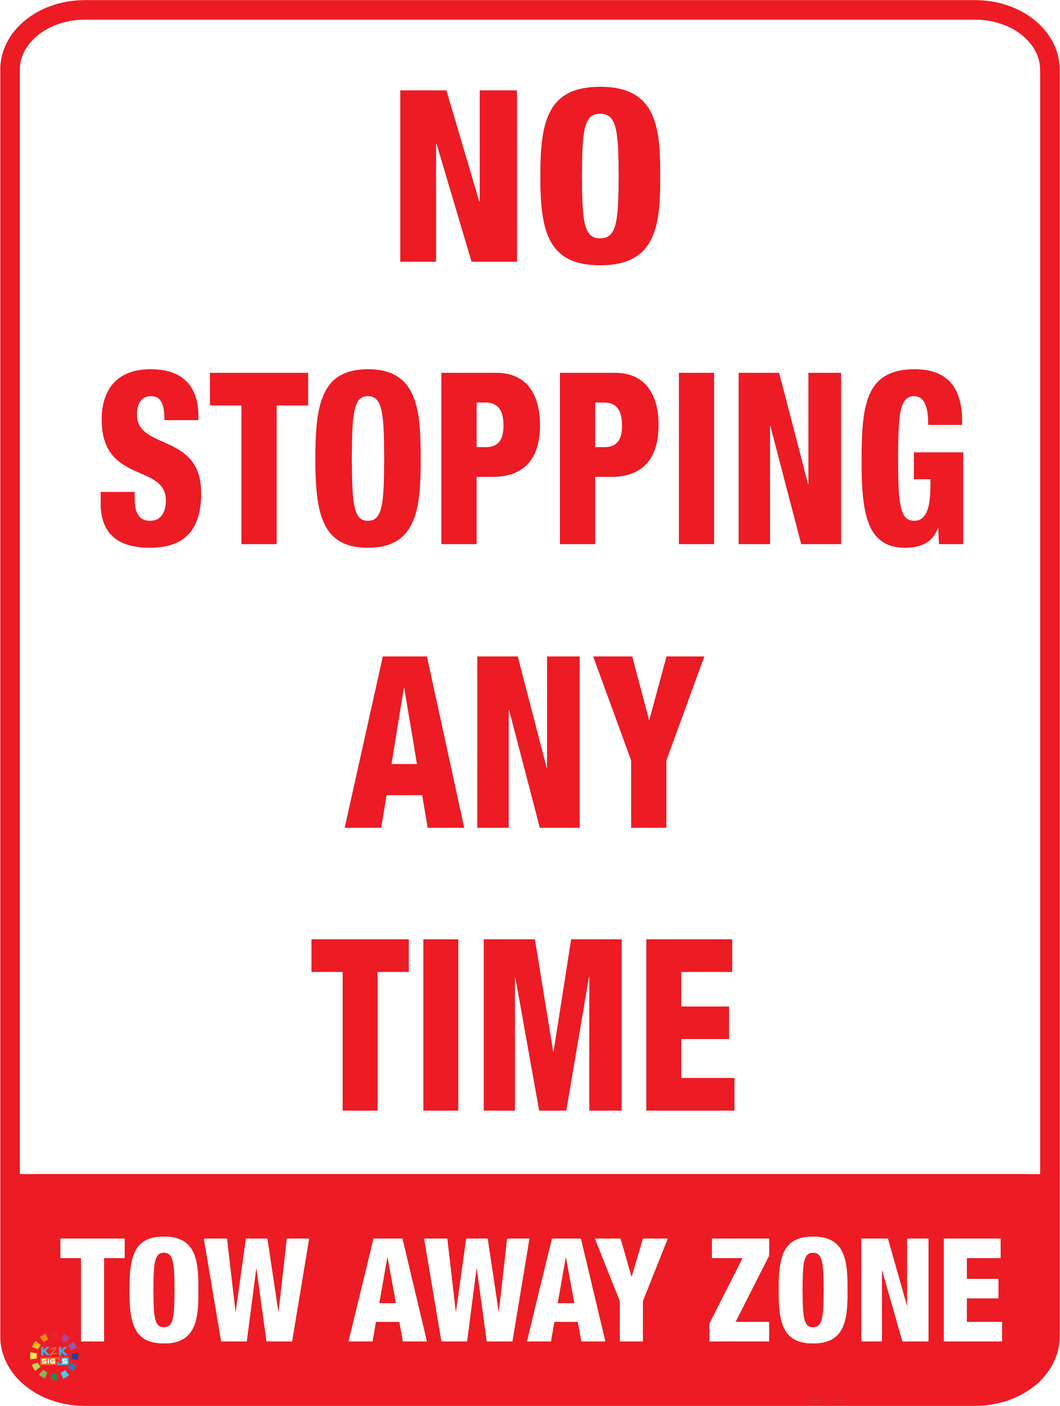 No Stopping Any Time - Tow Away Zone